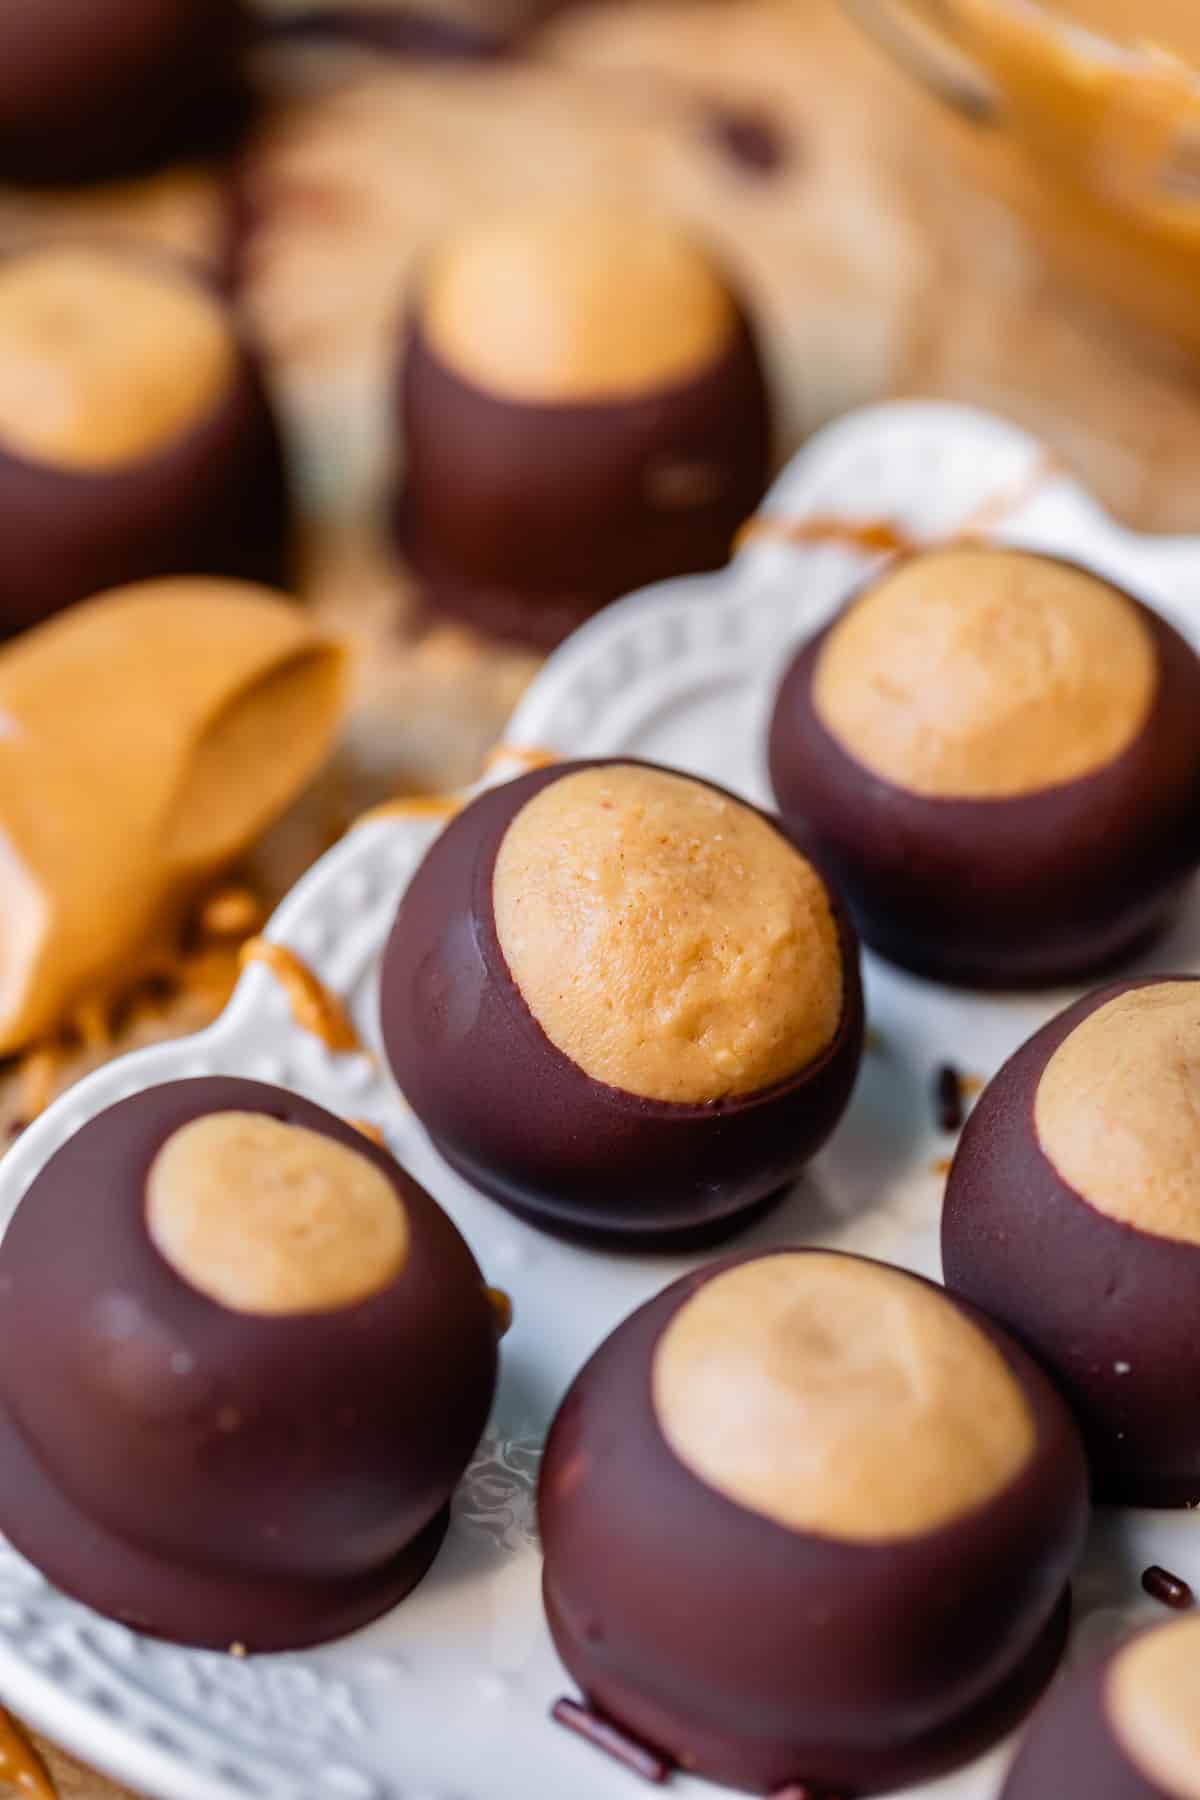 Buckeyes lined up on a white fancy plate with others in the background.